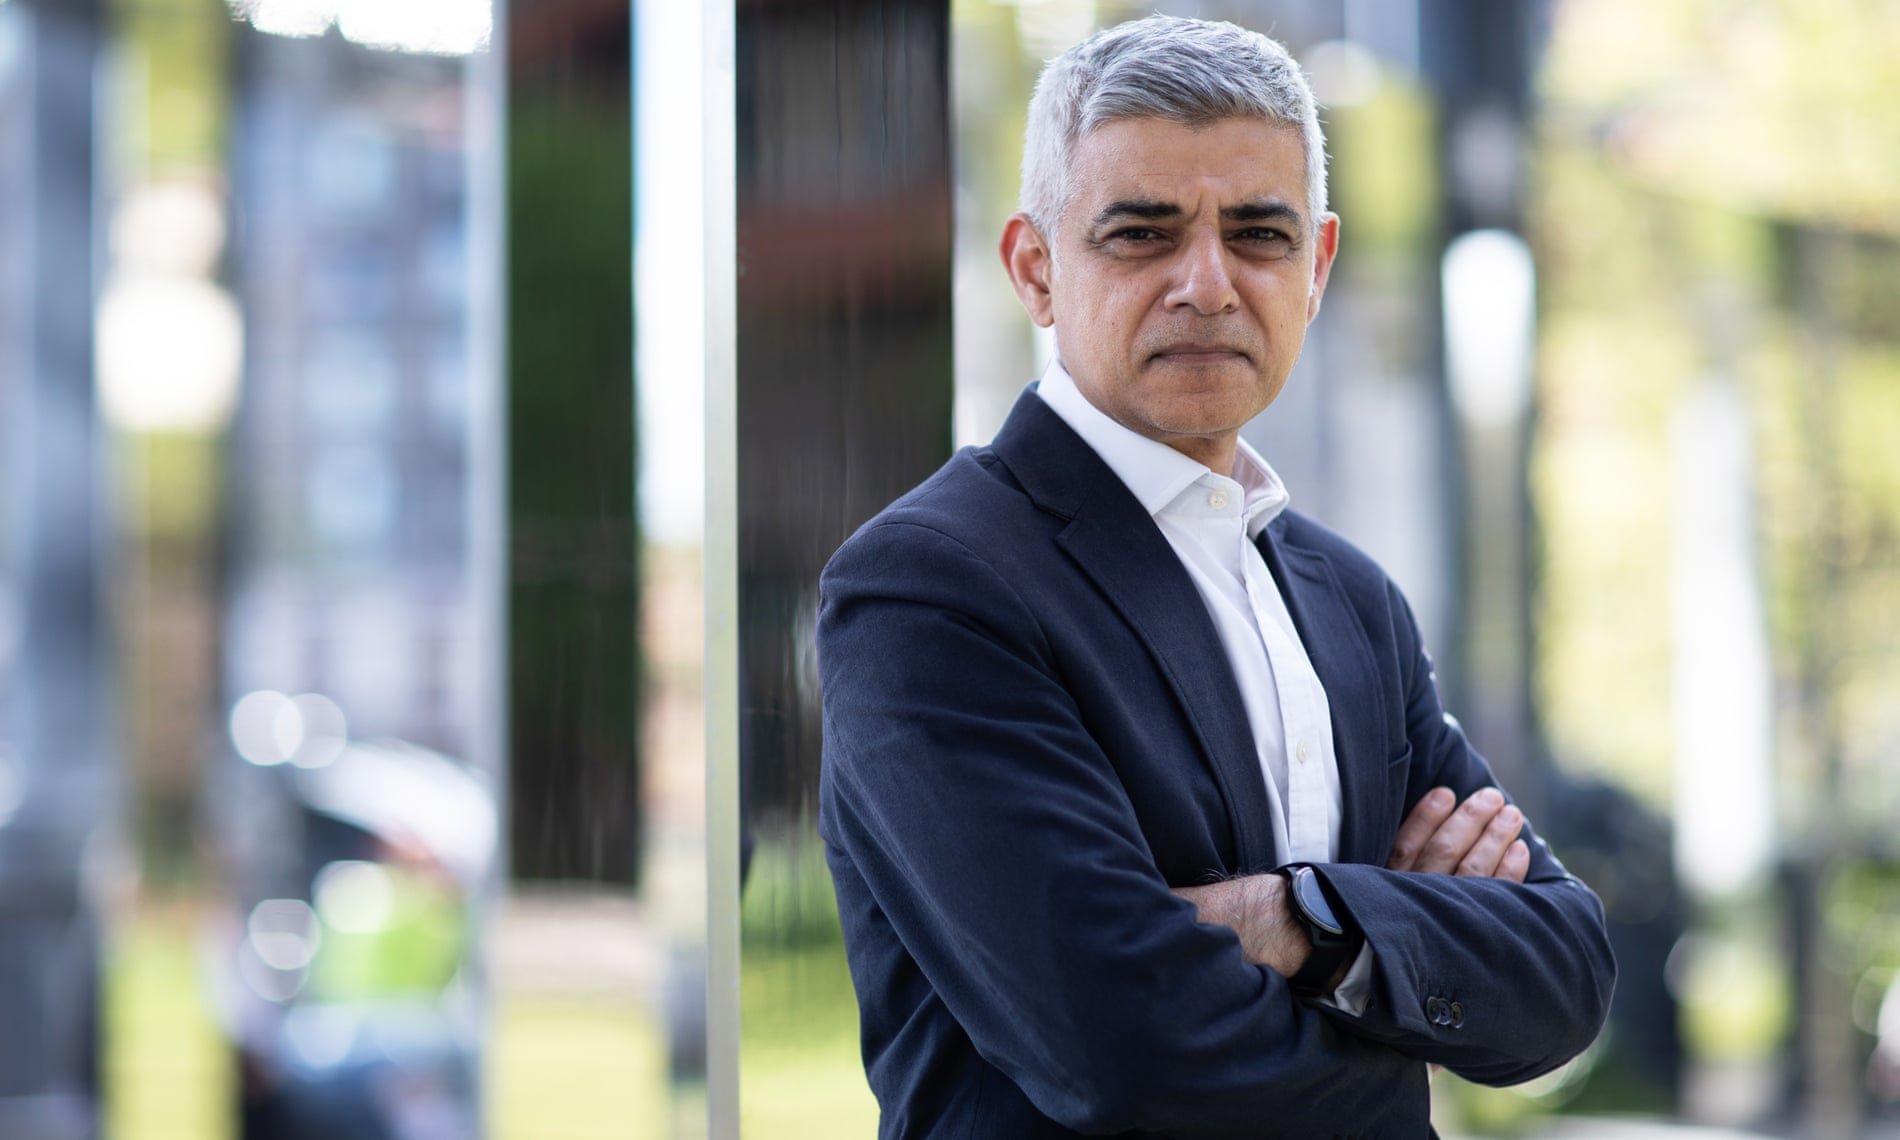 London Mayor Sadiq Khan: Untreated Mental Health a Major Cause of Violent Crimes, Warns of Complex Causes and Necessity for Early Intervention